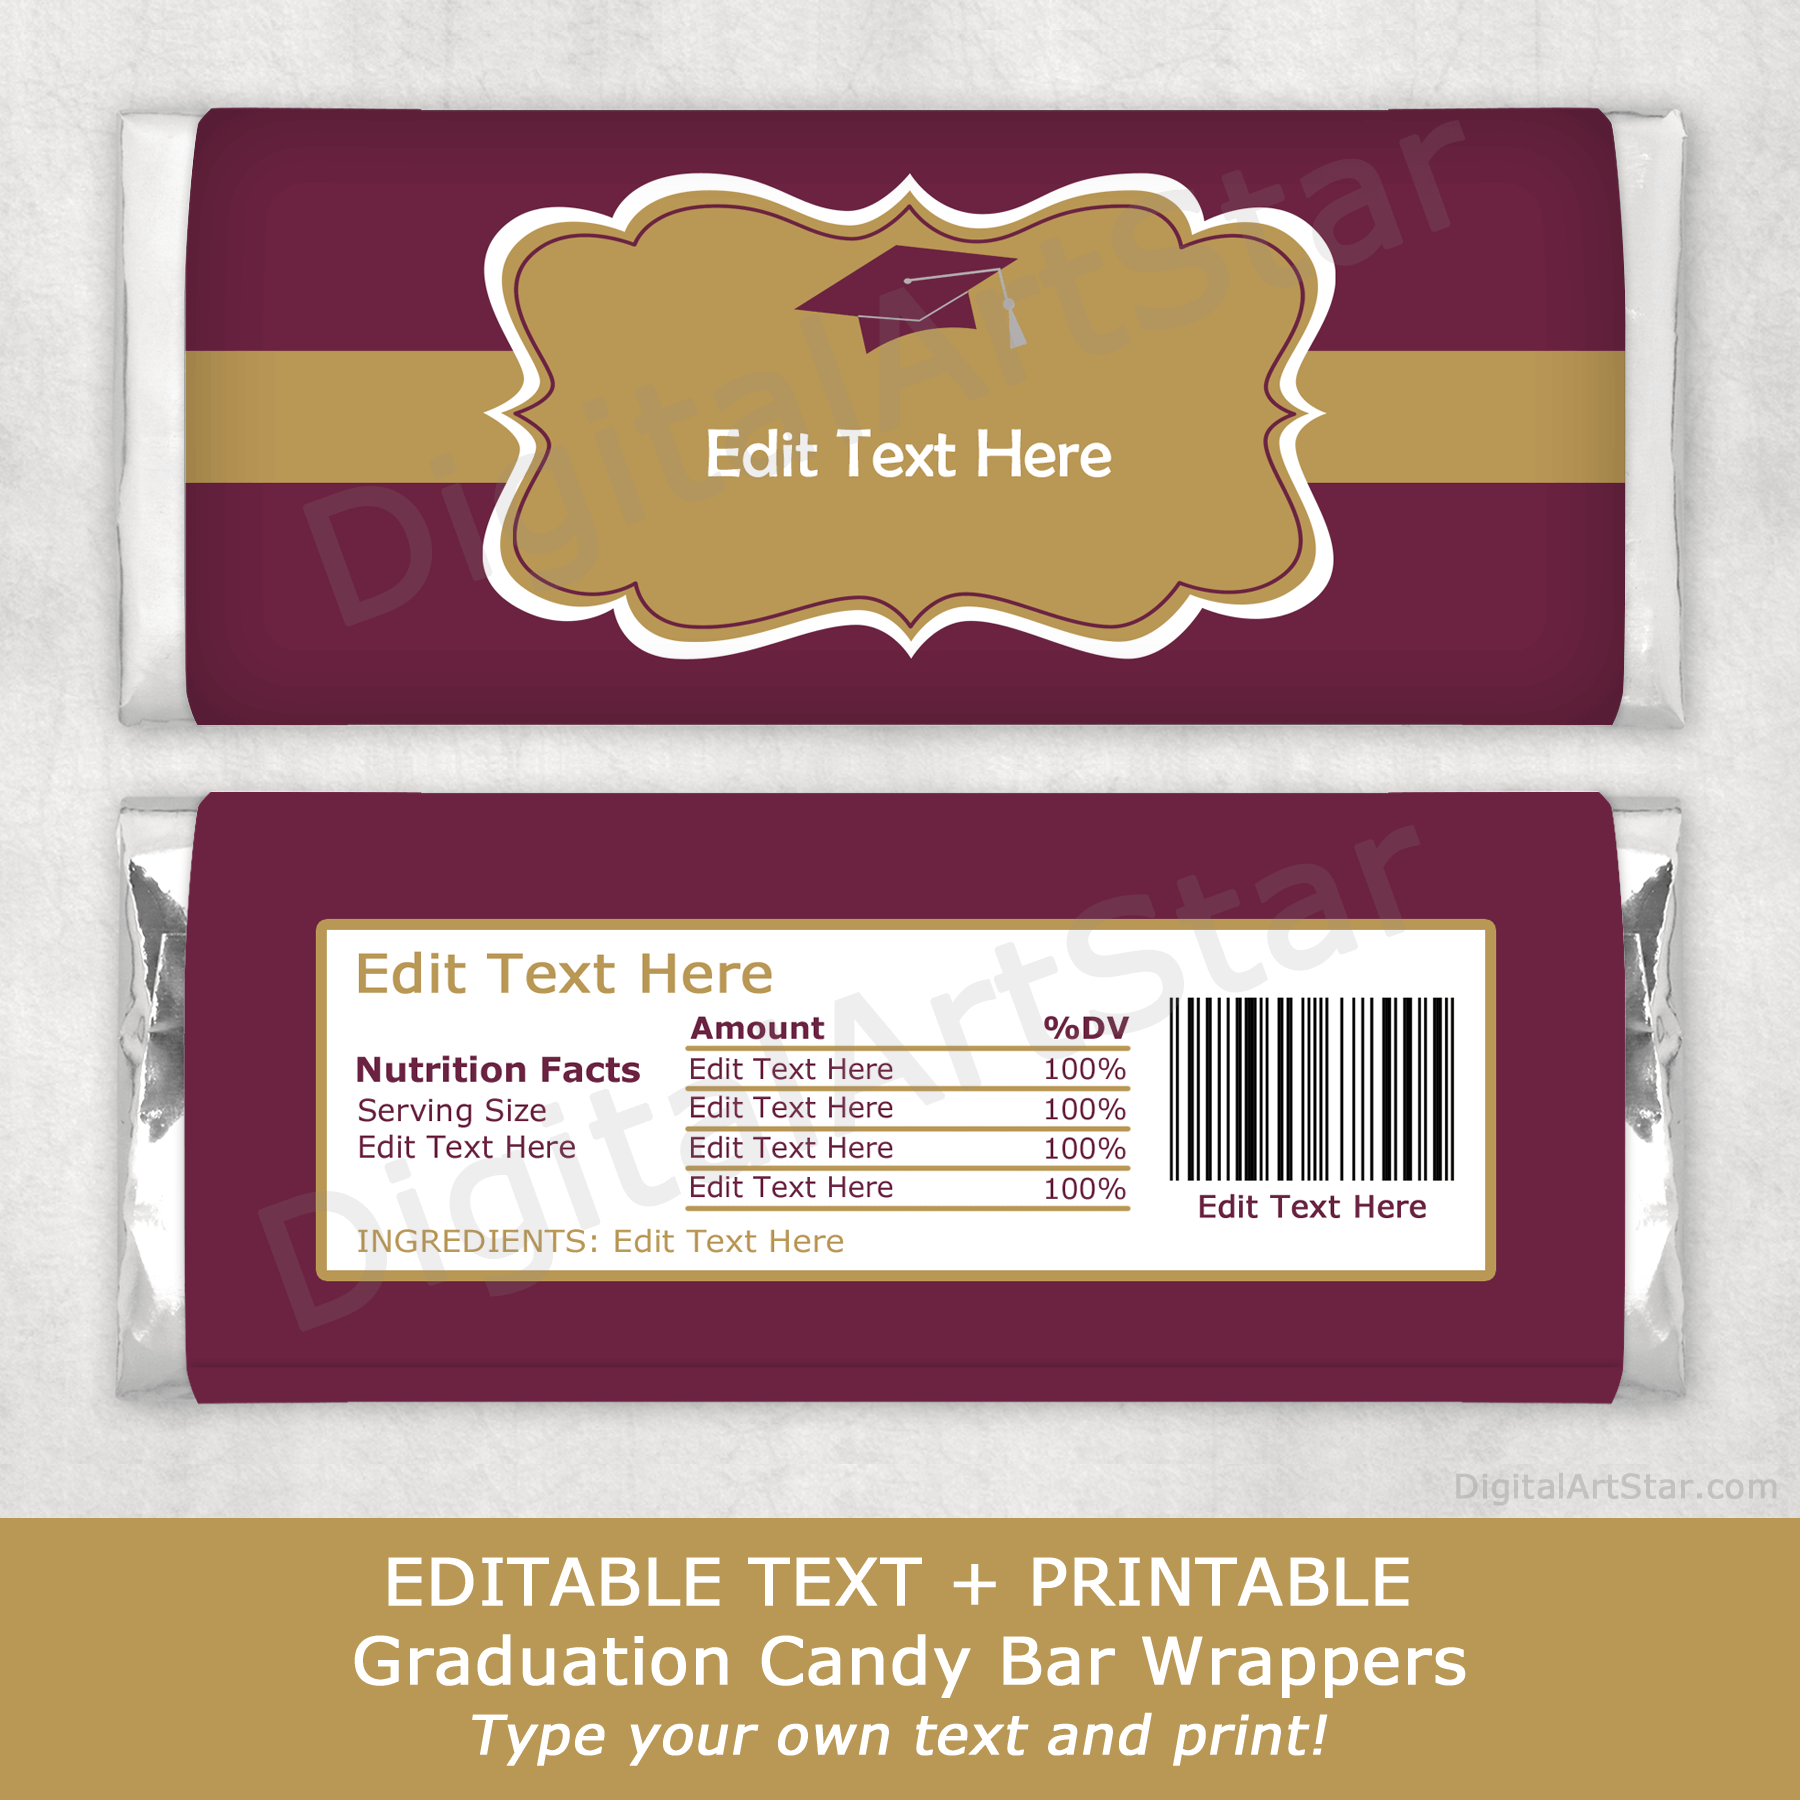 maroon-and-gold-graduation-candy-bar-wrappers-digital-art-star